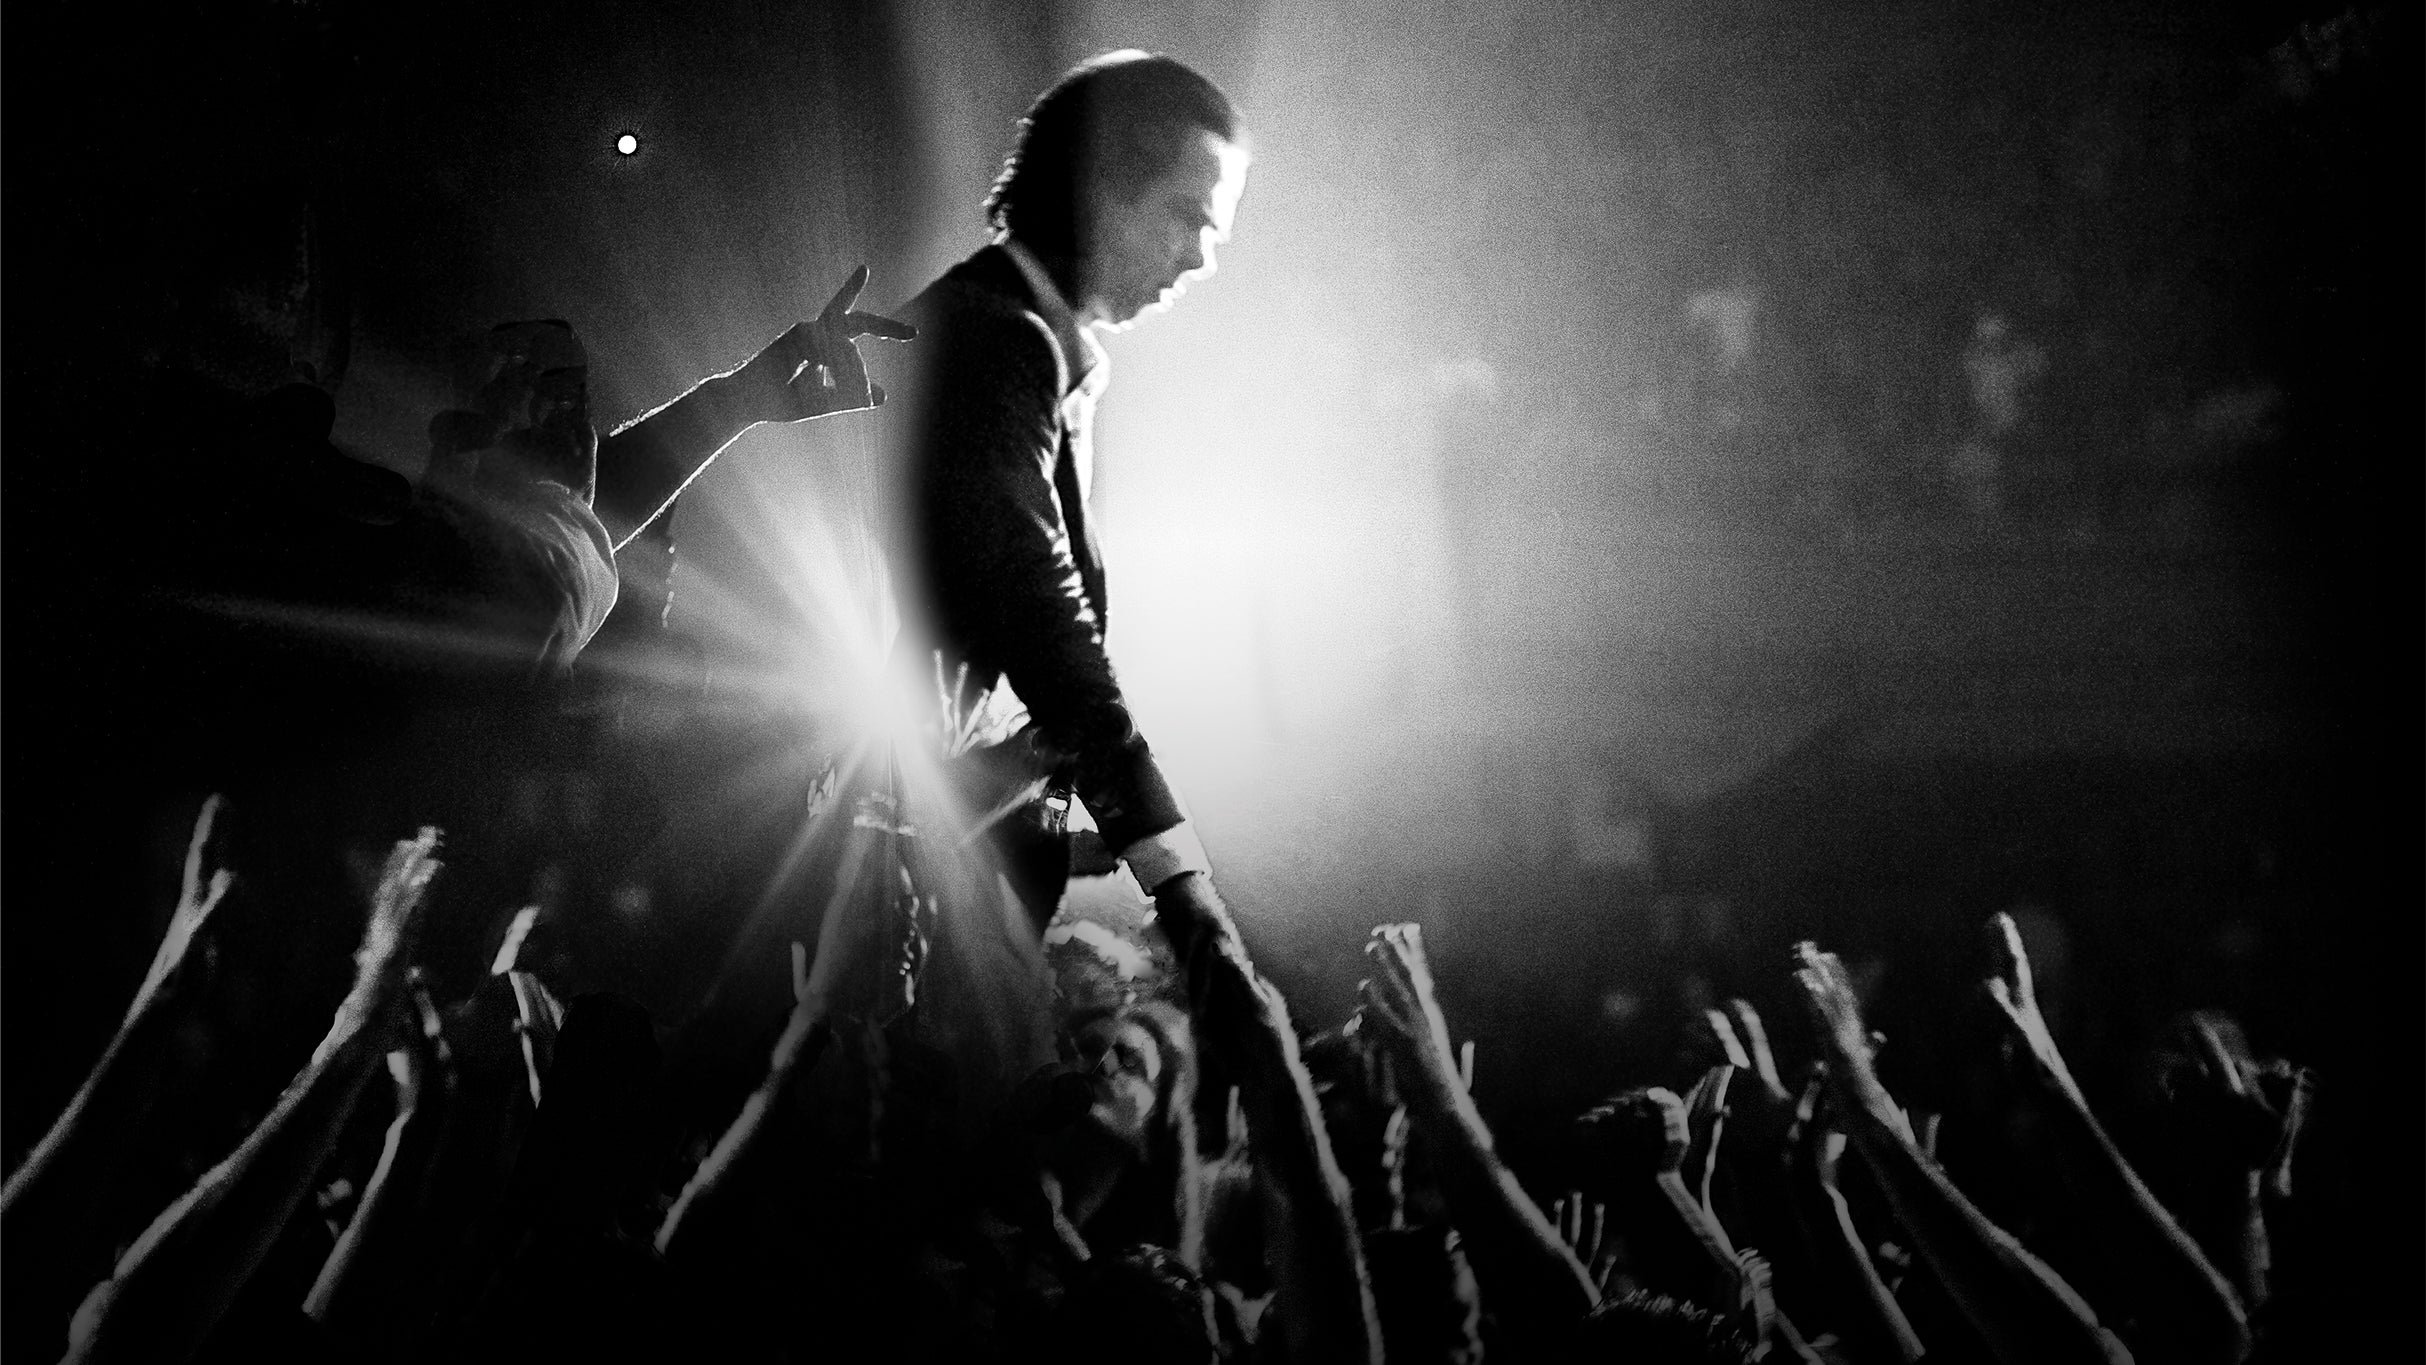 Nick Cave & the Bad Seeds:The Wild God Tour in Leeds promo photo for Venue presale offer code